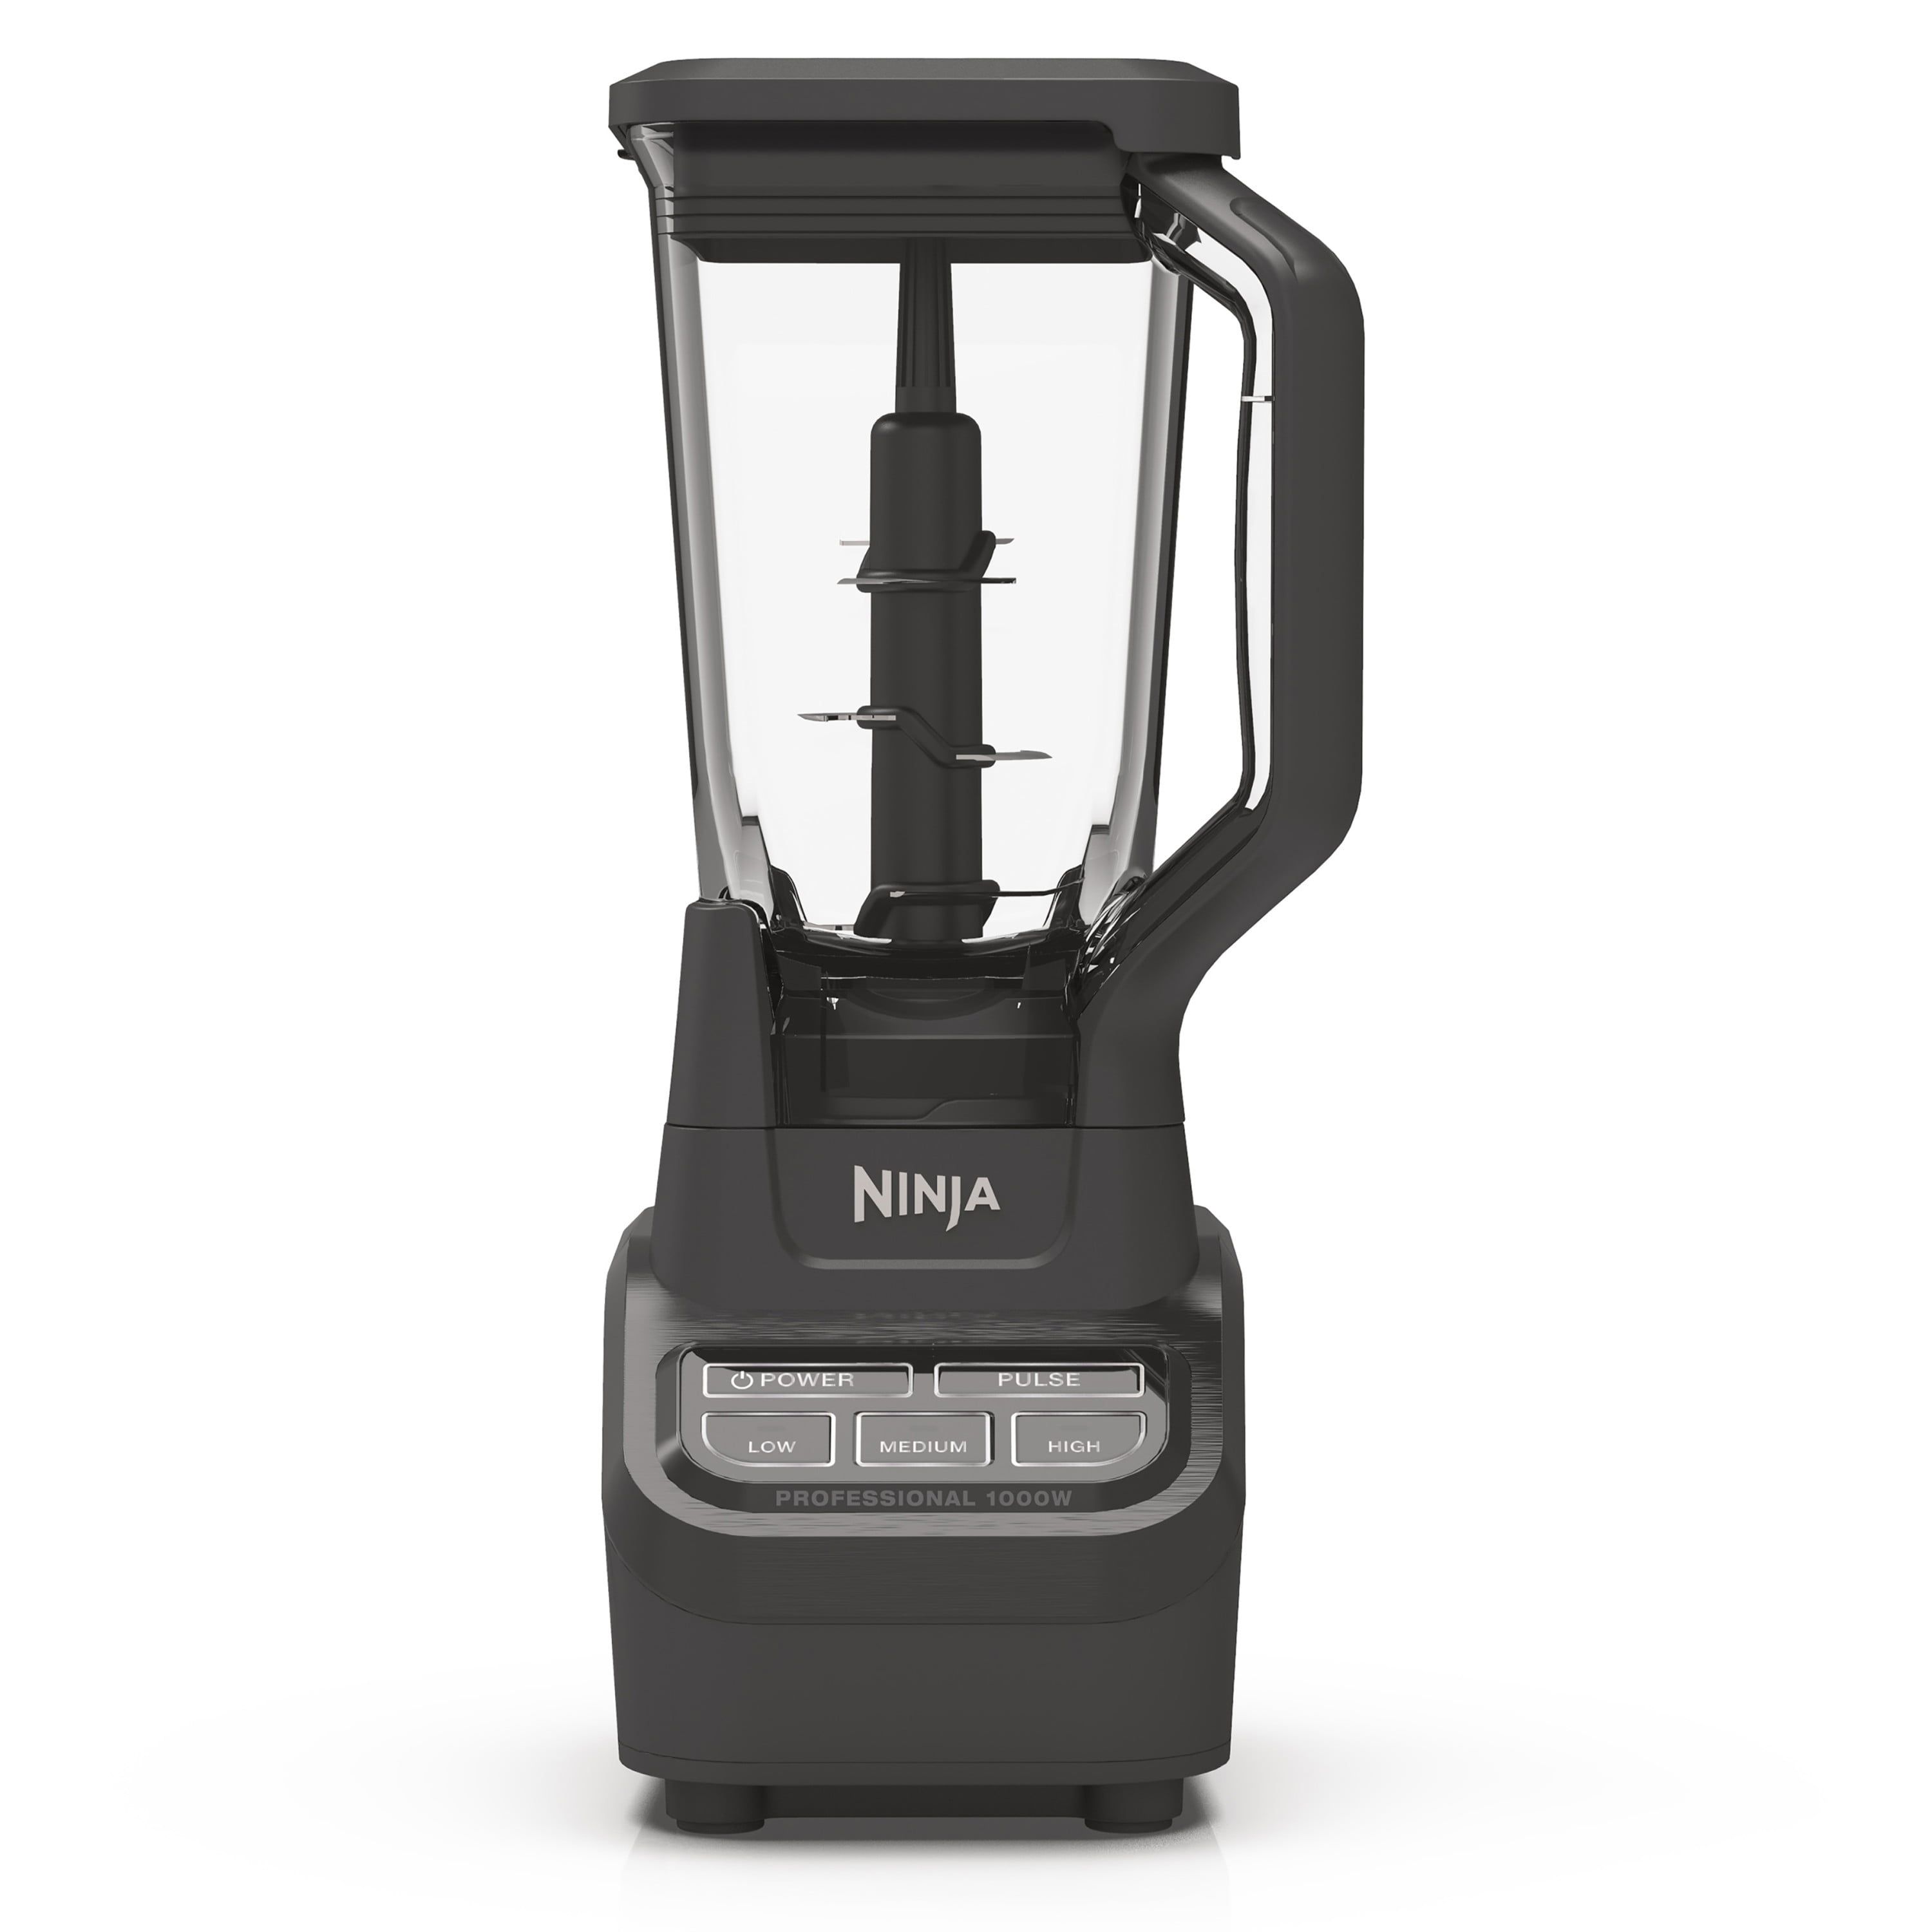 Ninja's ultra-powerful blender is only $50 at Walmart